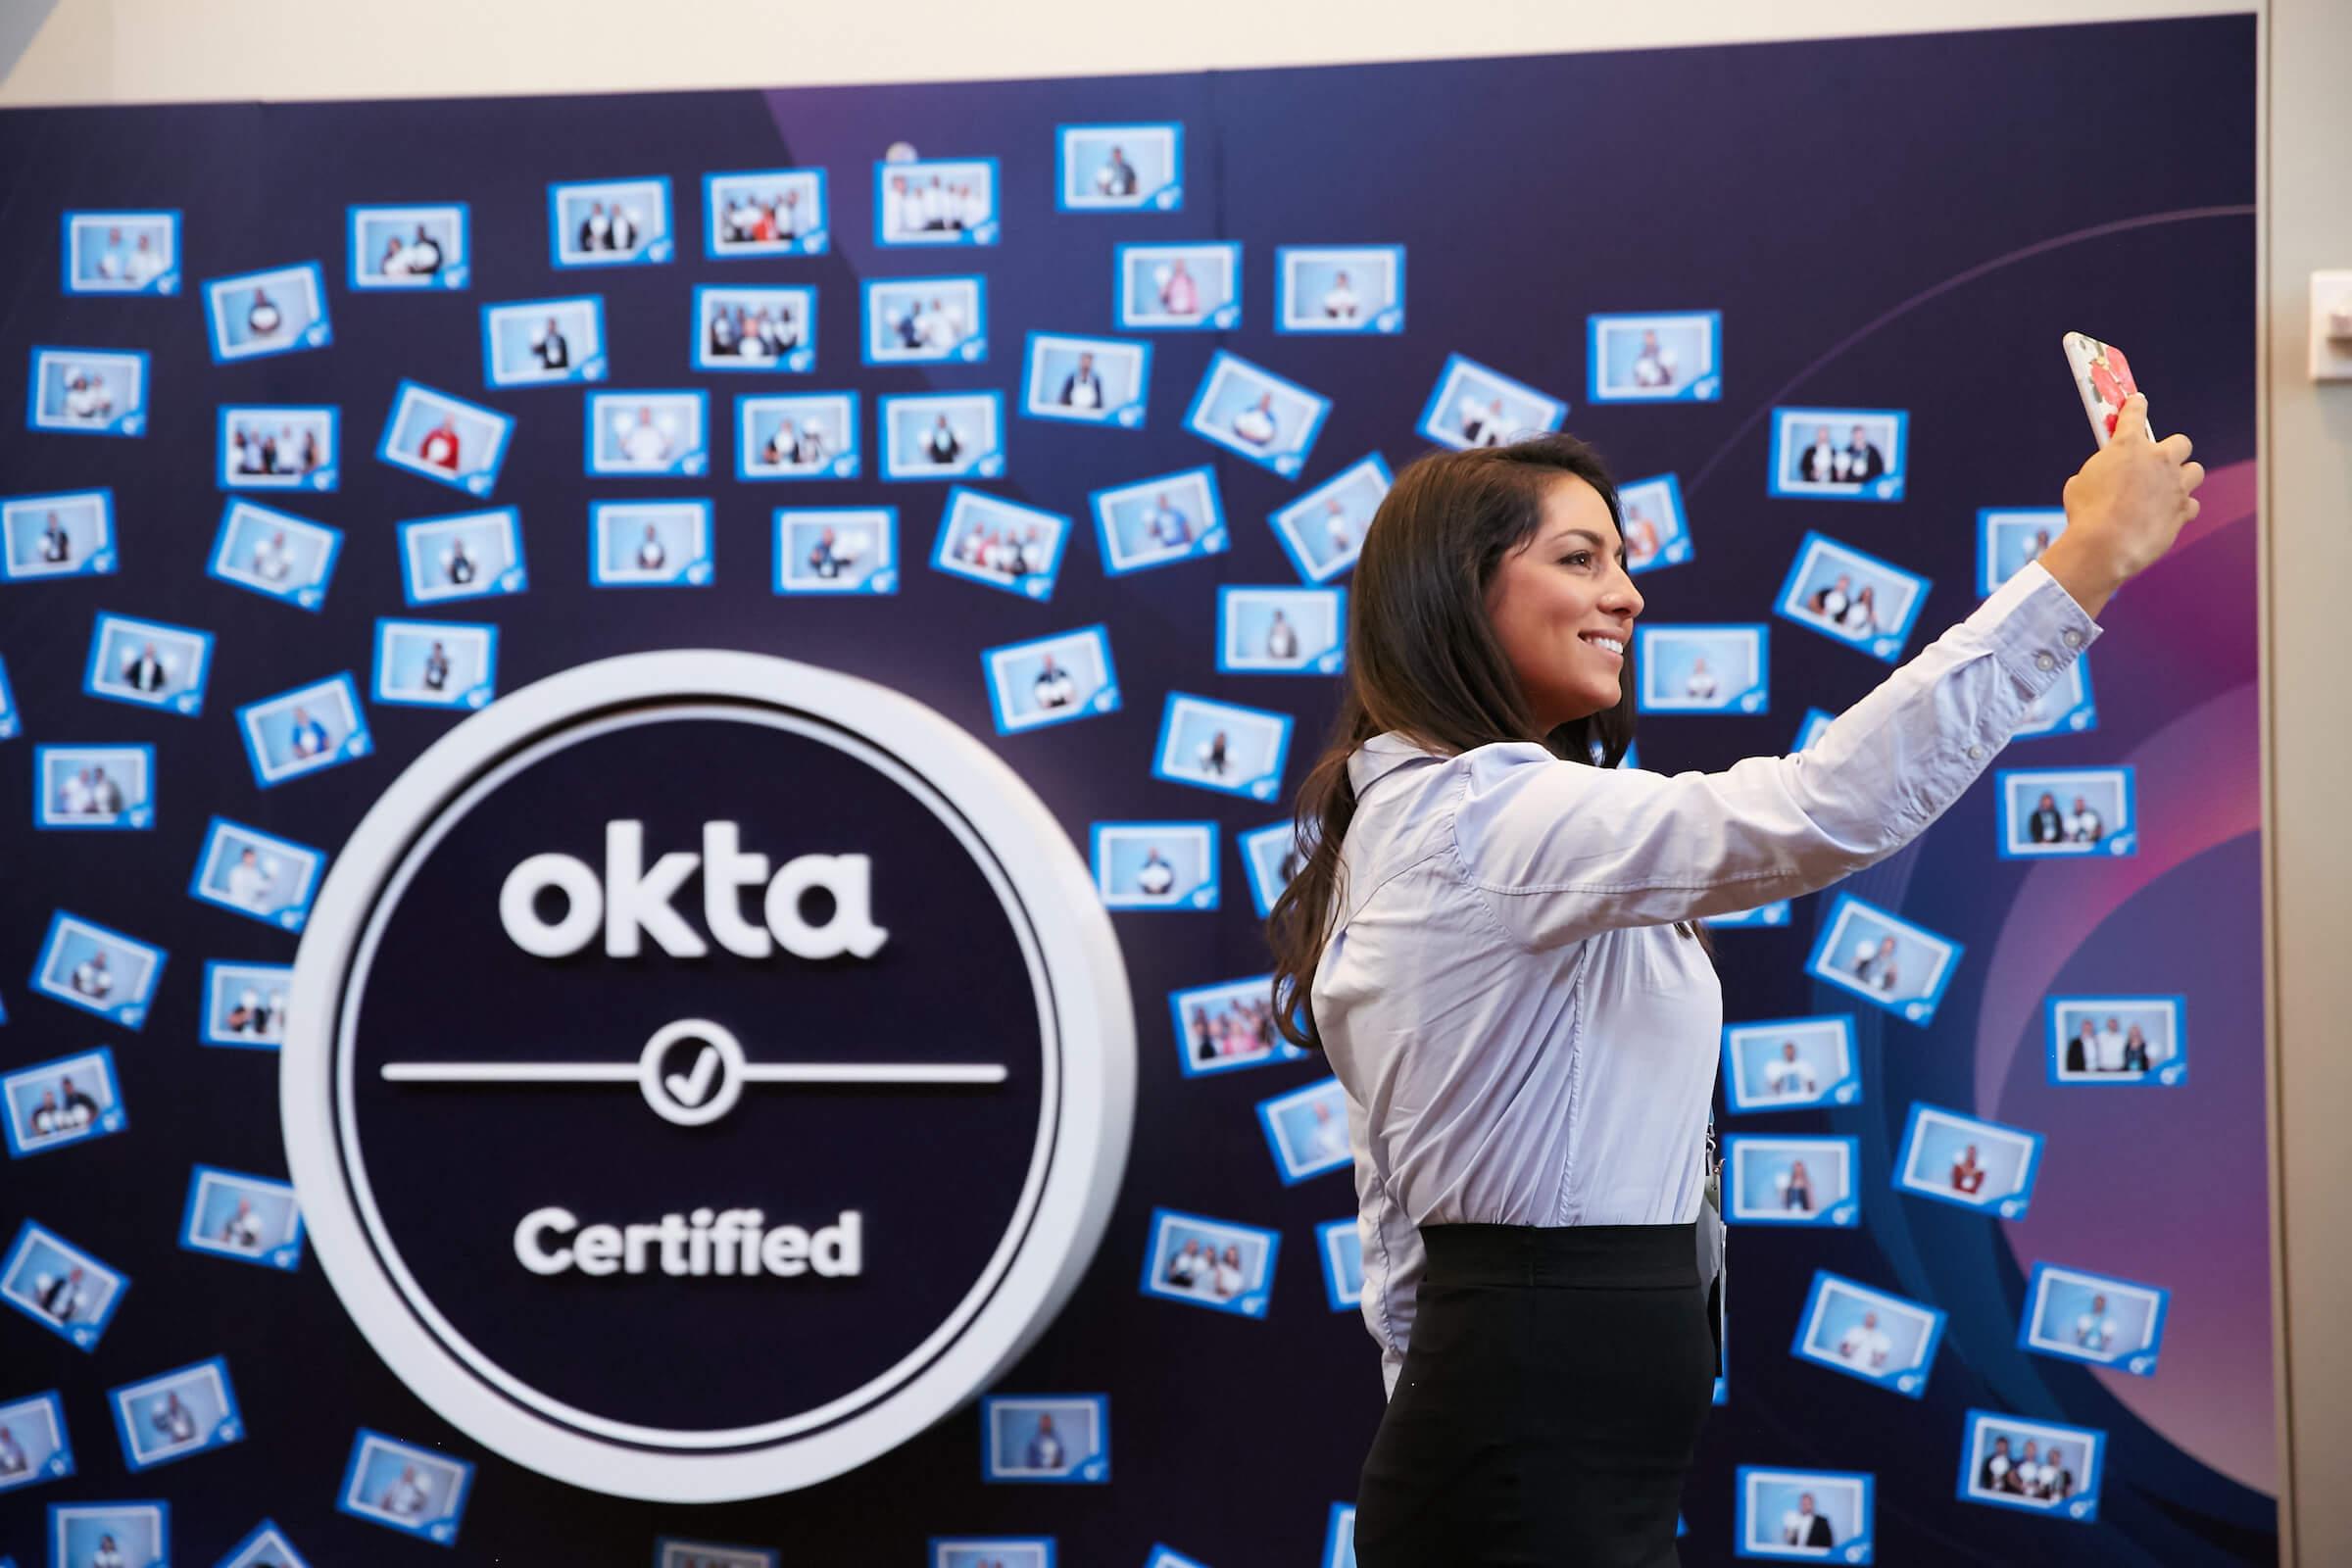 Tips For Studying For the Okta Professional Exam